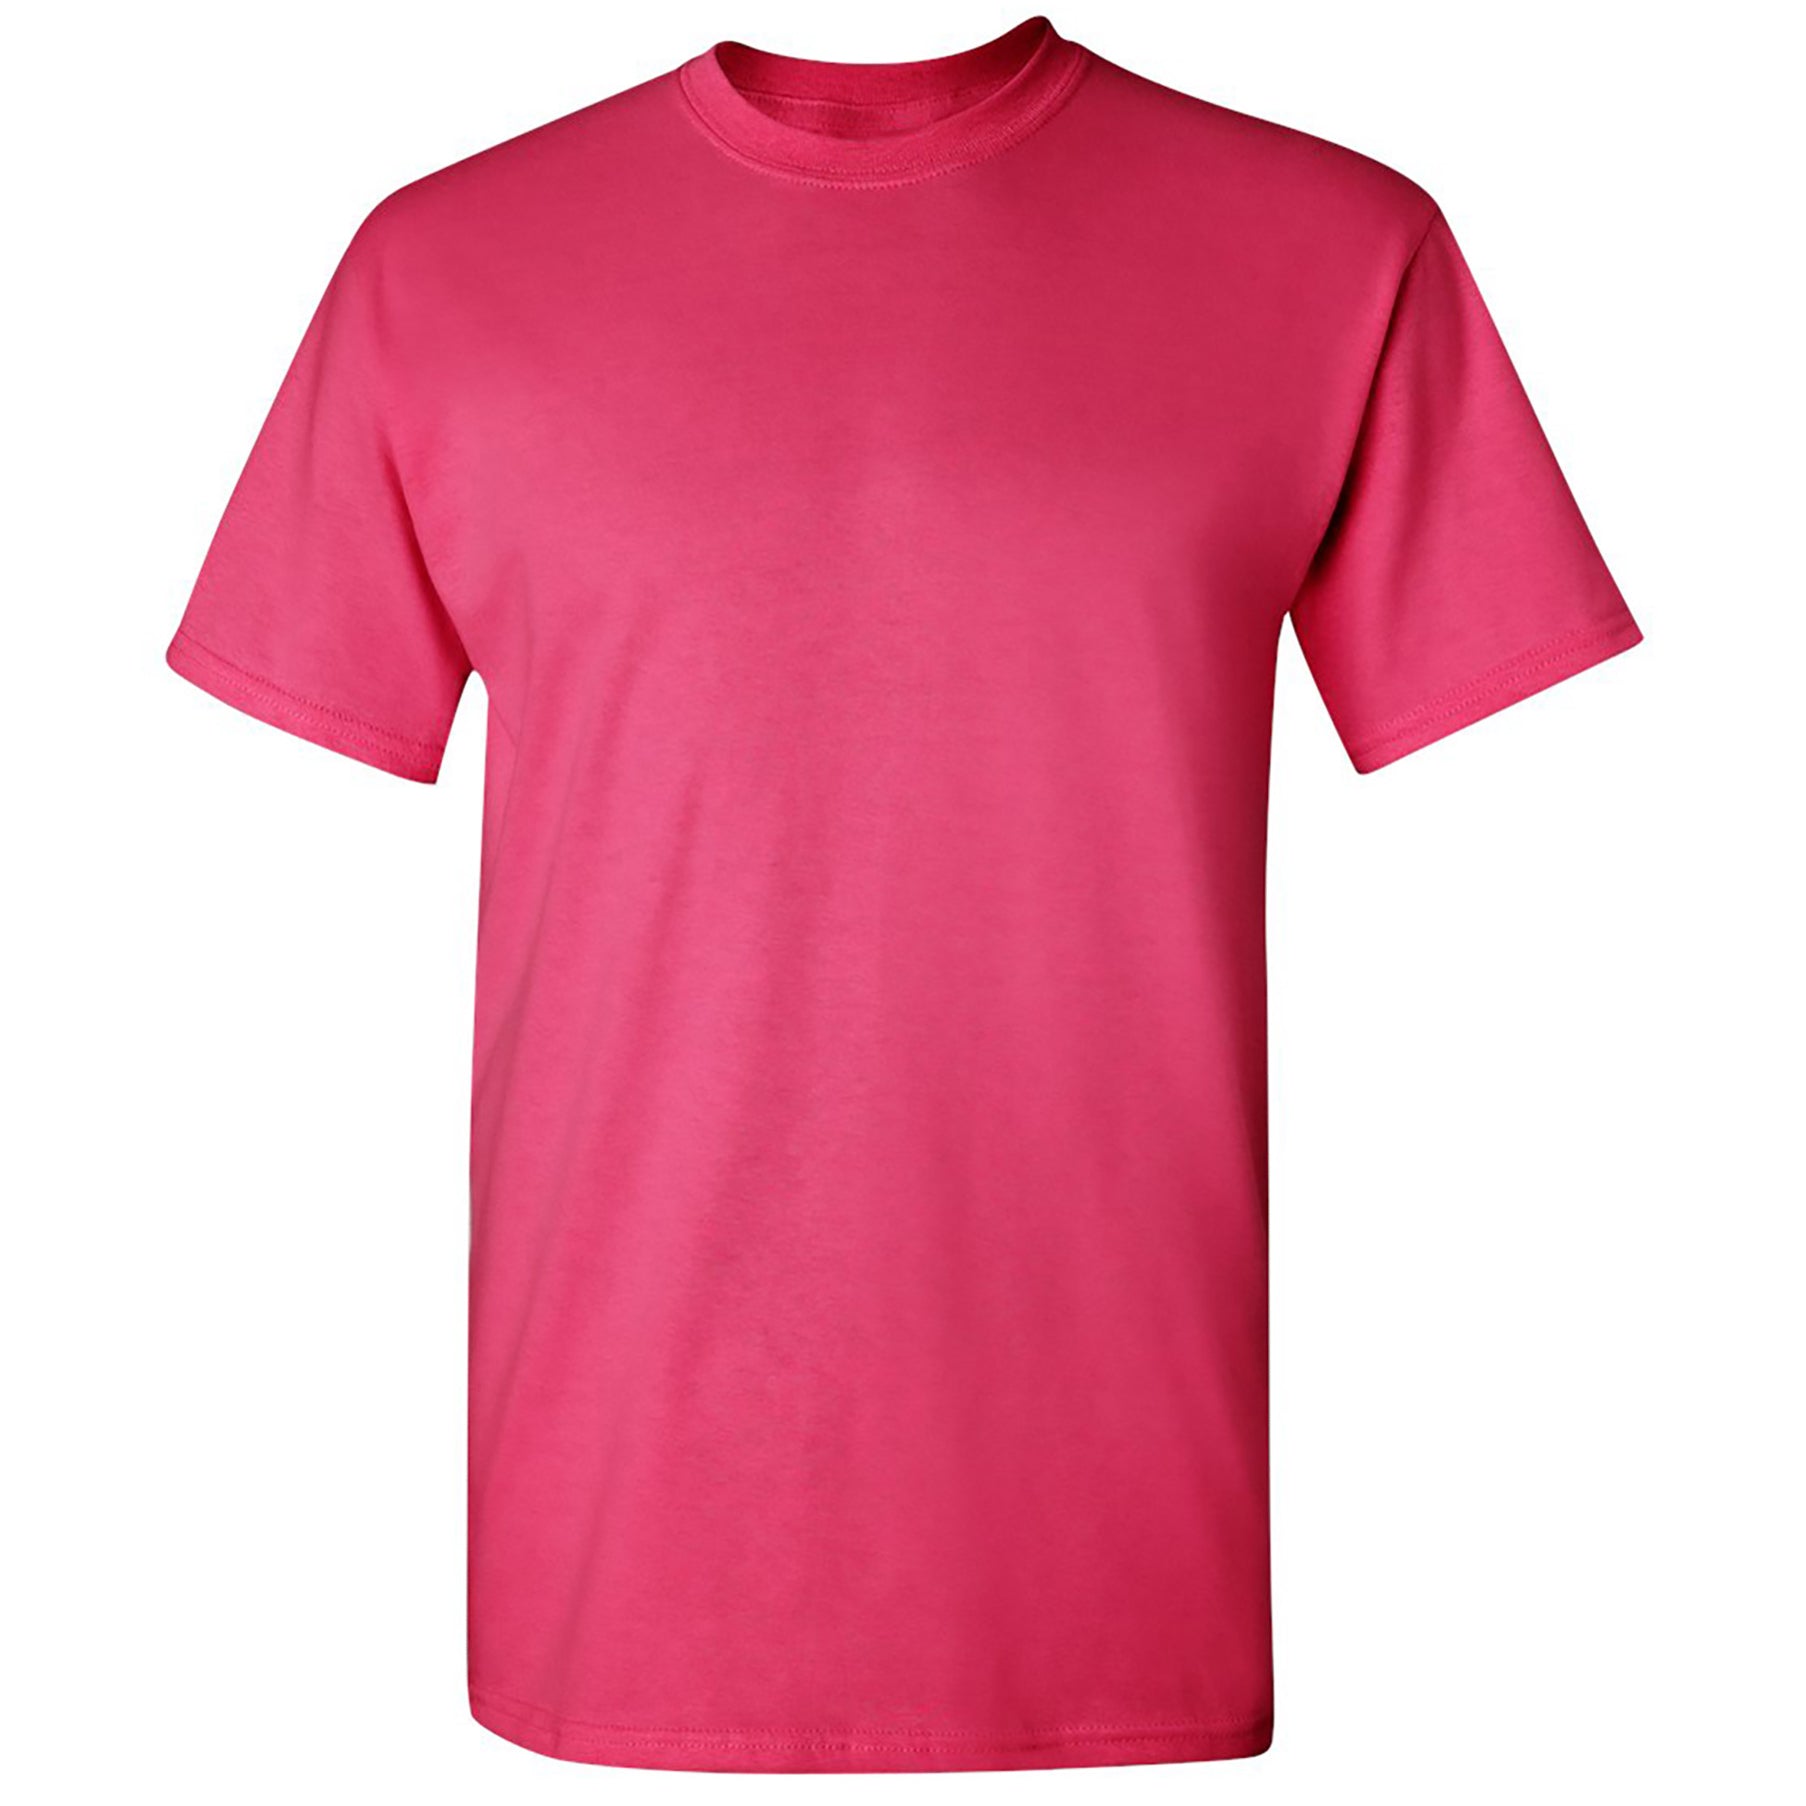 Why Plain T-shirts Are the Most Comfortable Clothing by plaintshirtsuk -  Issuu